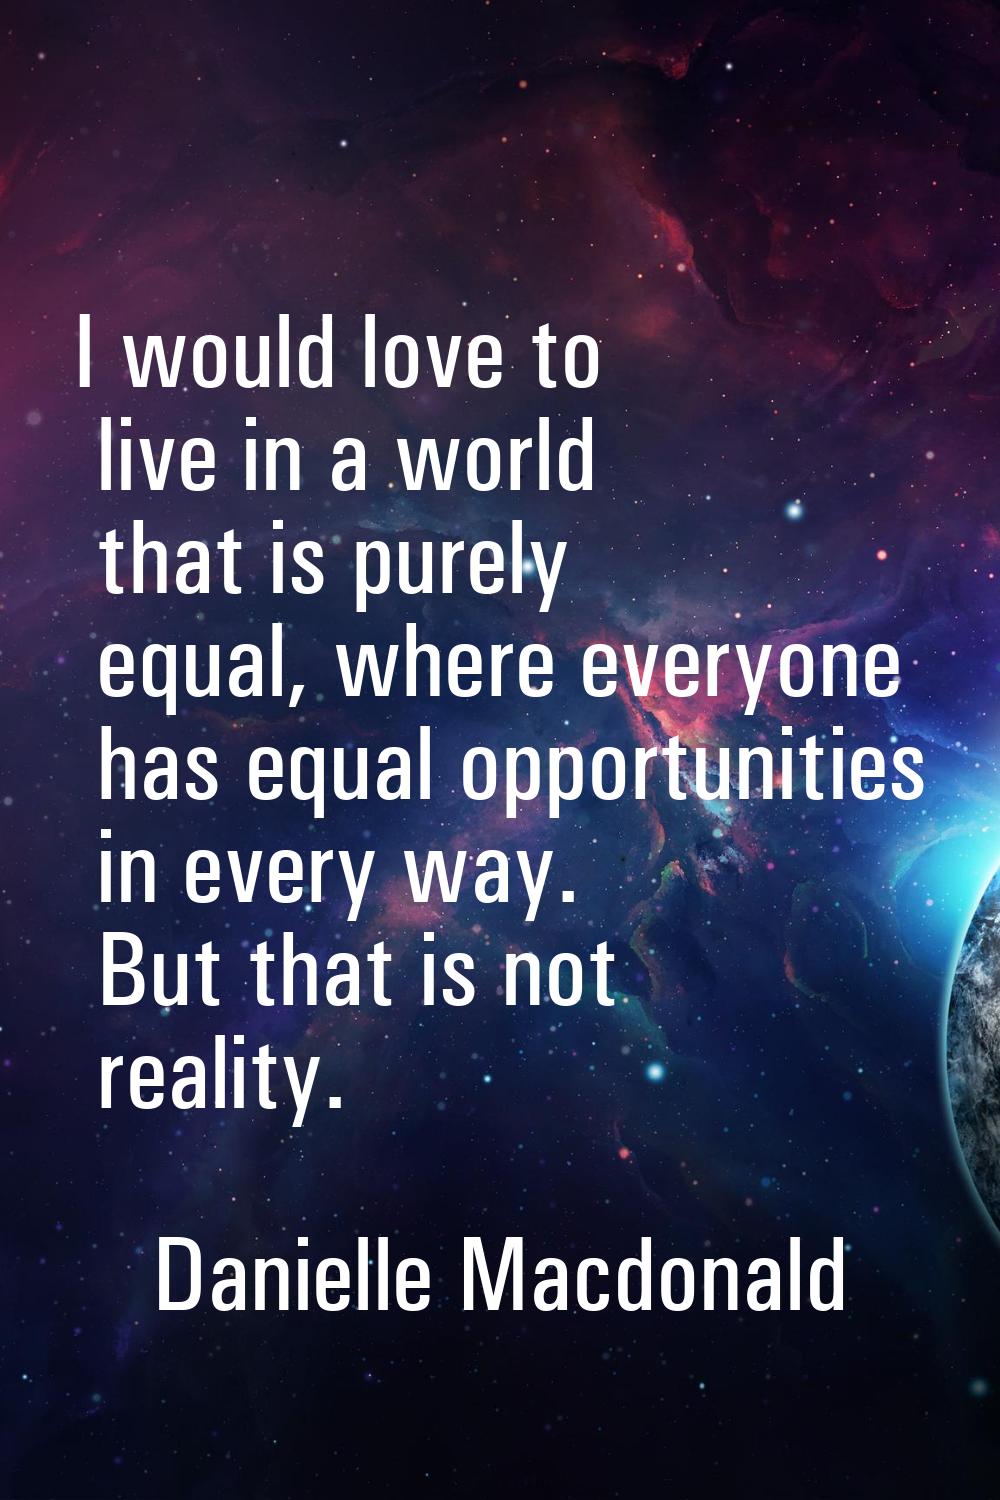 I would love to live in a world that is purely equal, where everyone has equal opportunities in eve